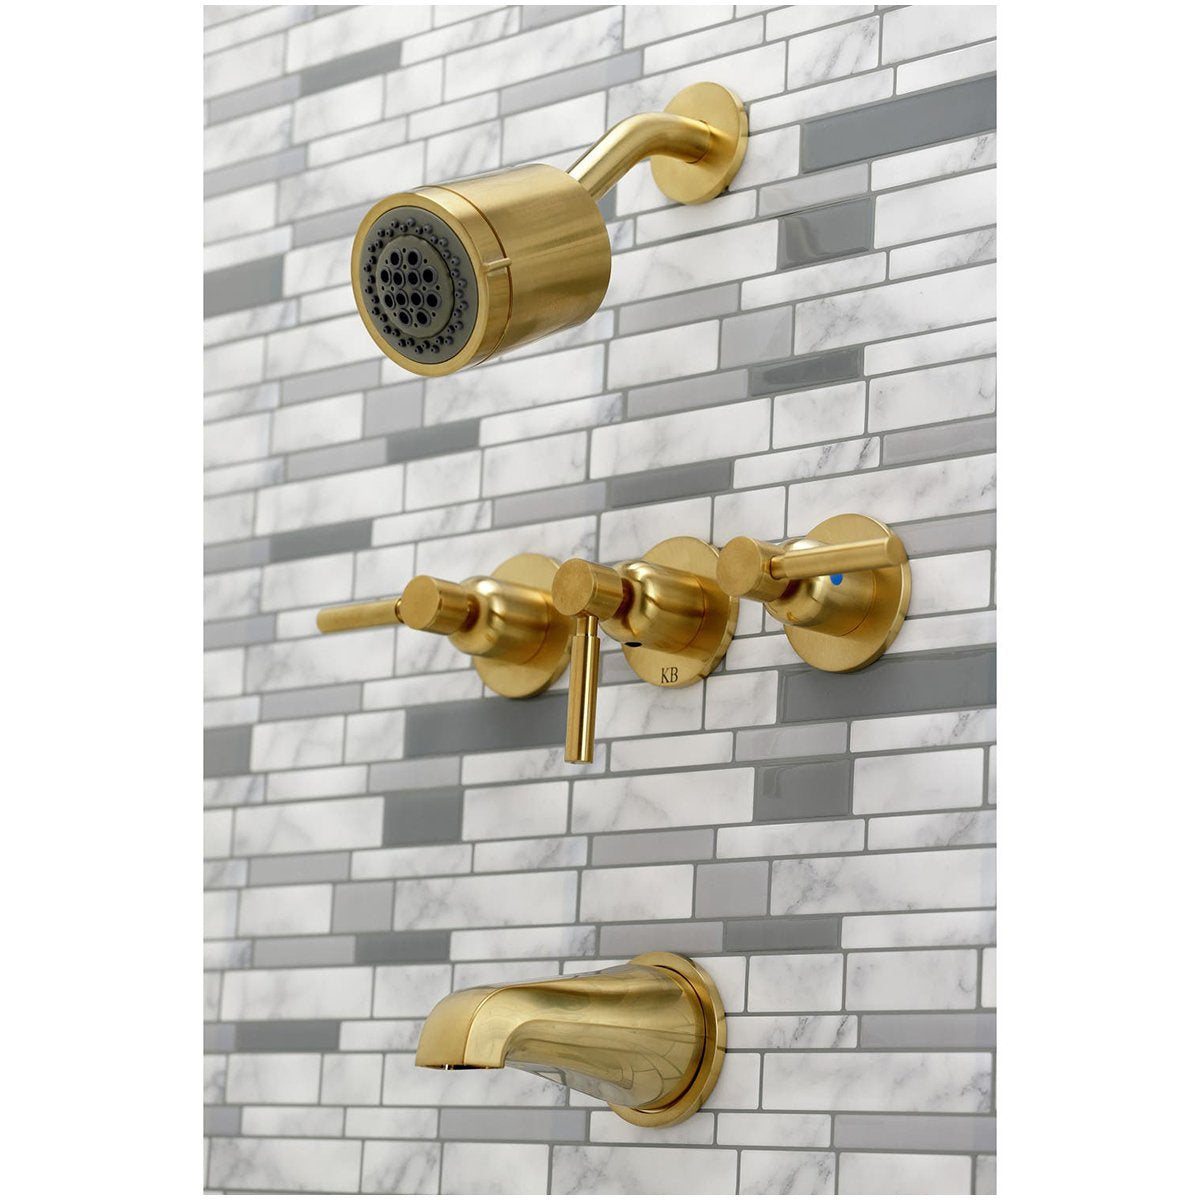 Kingston Brass Concord 7.13" x 14.13" Three-Handle Tub and Shower Faucet